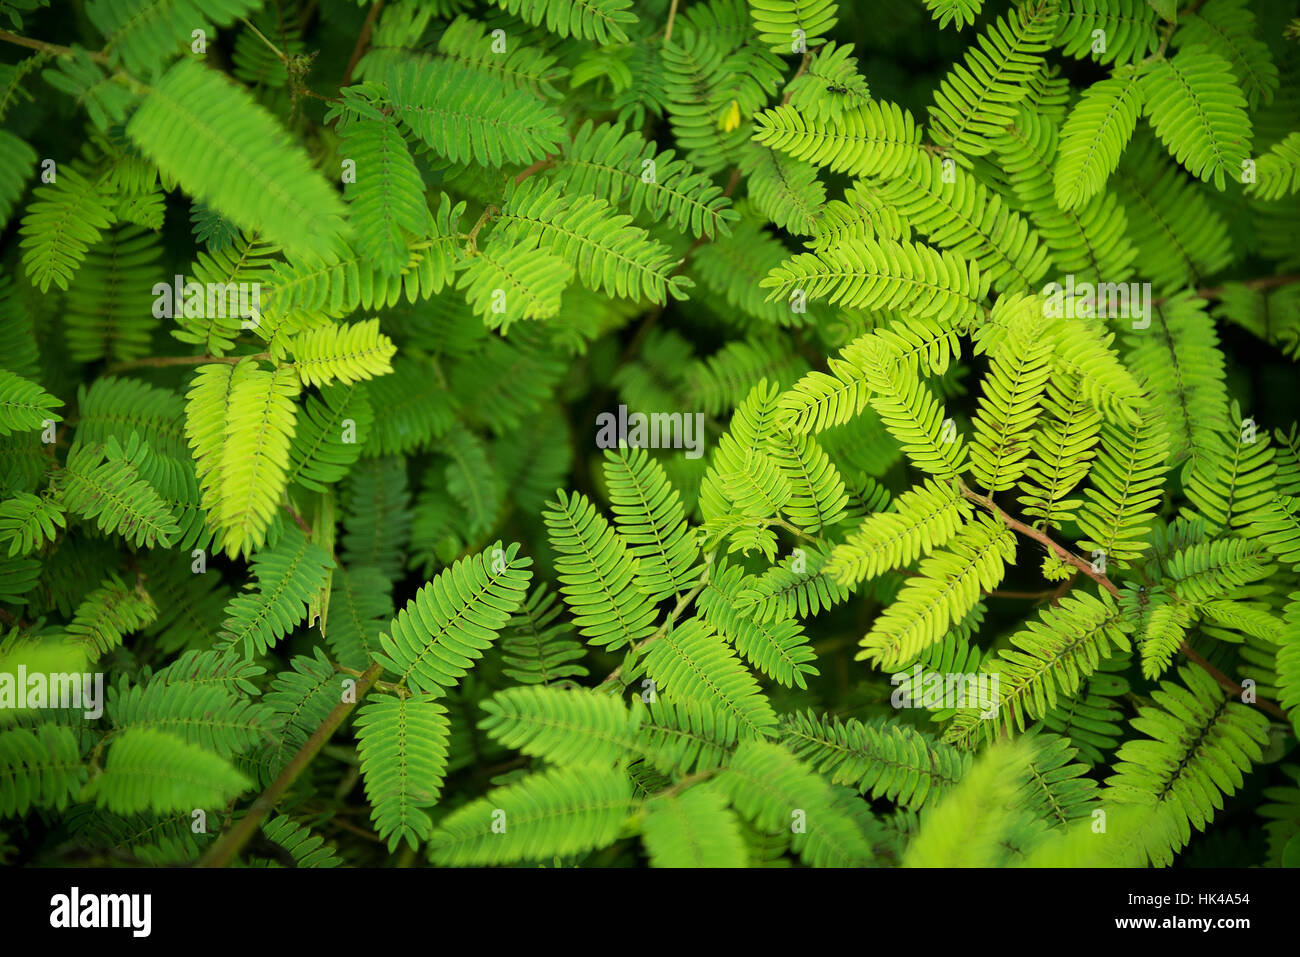 Acacia green leaves nature background top view Stock Photo